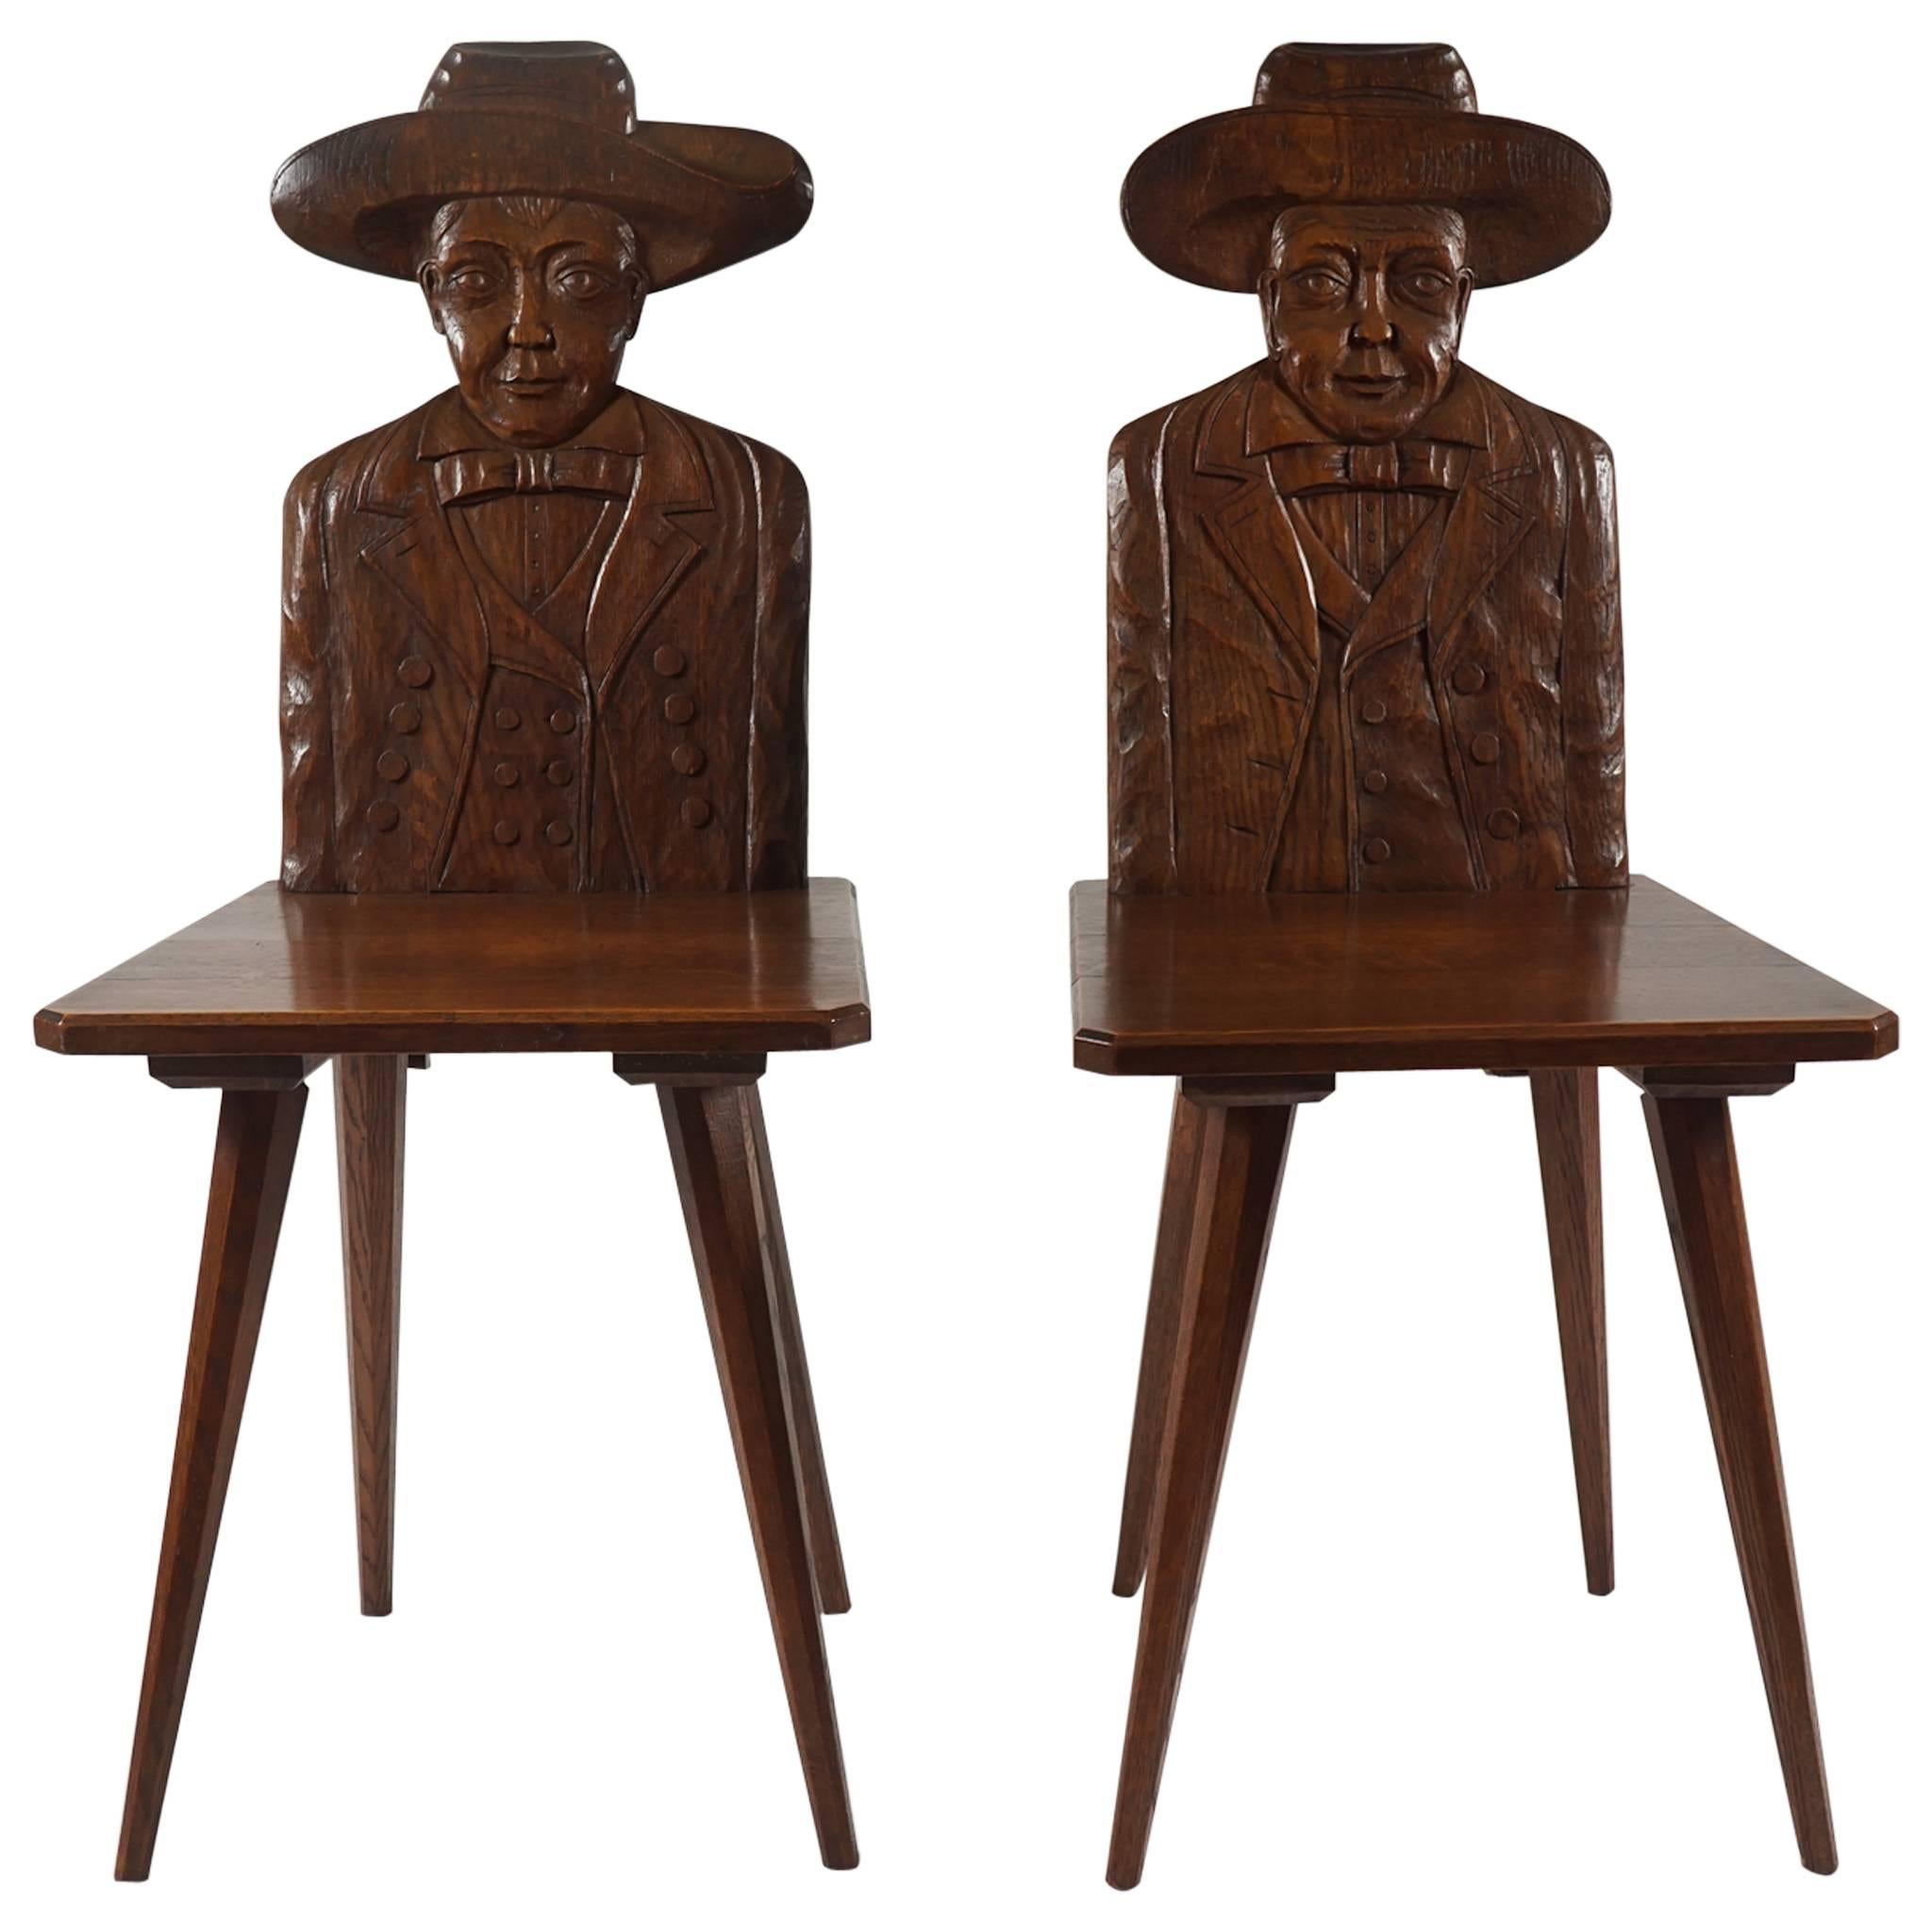 Exceptional Pair of Early French Modernist 'Cowboy' Hall Seats, circa 1920